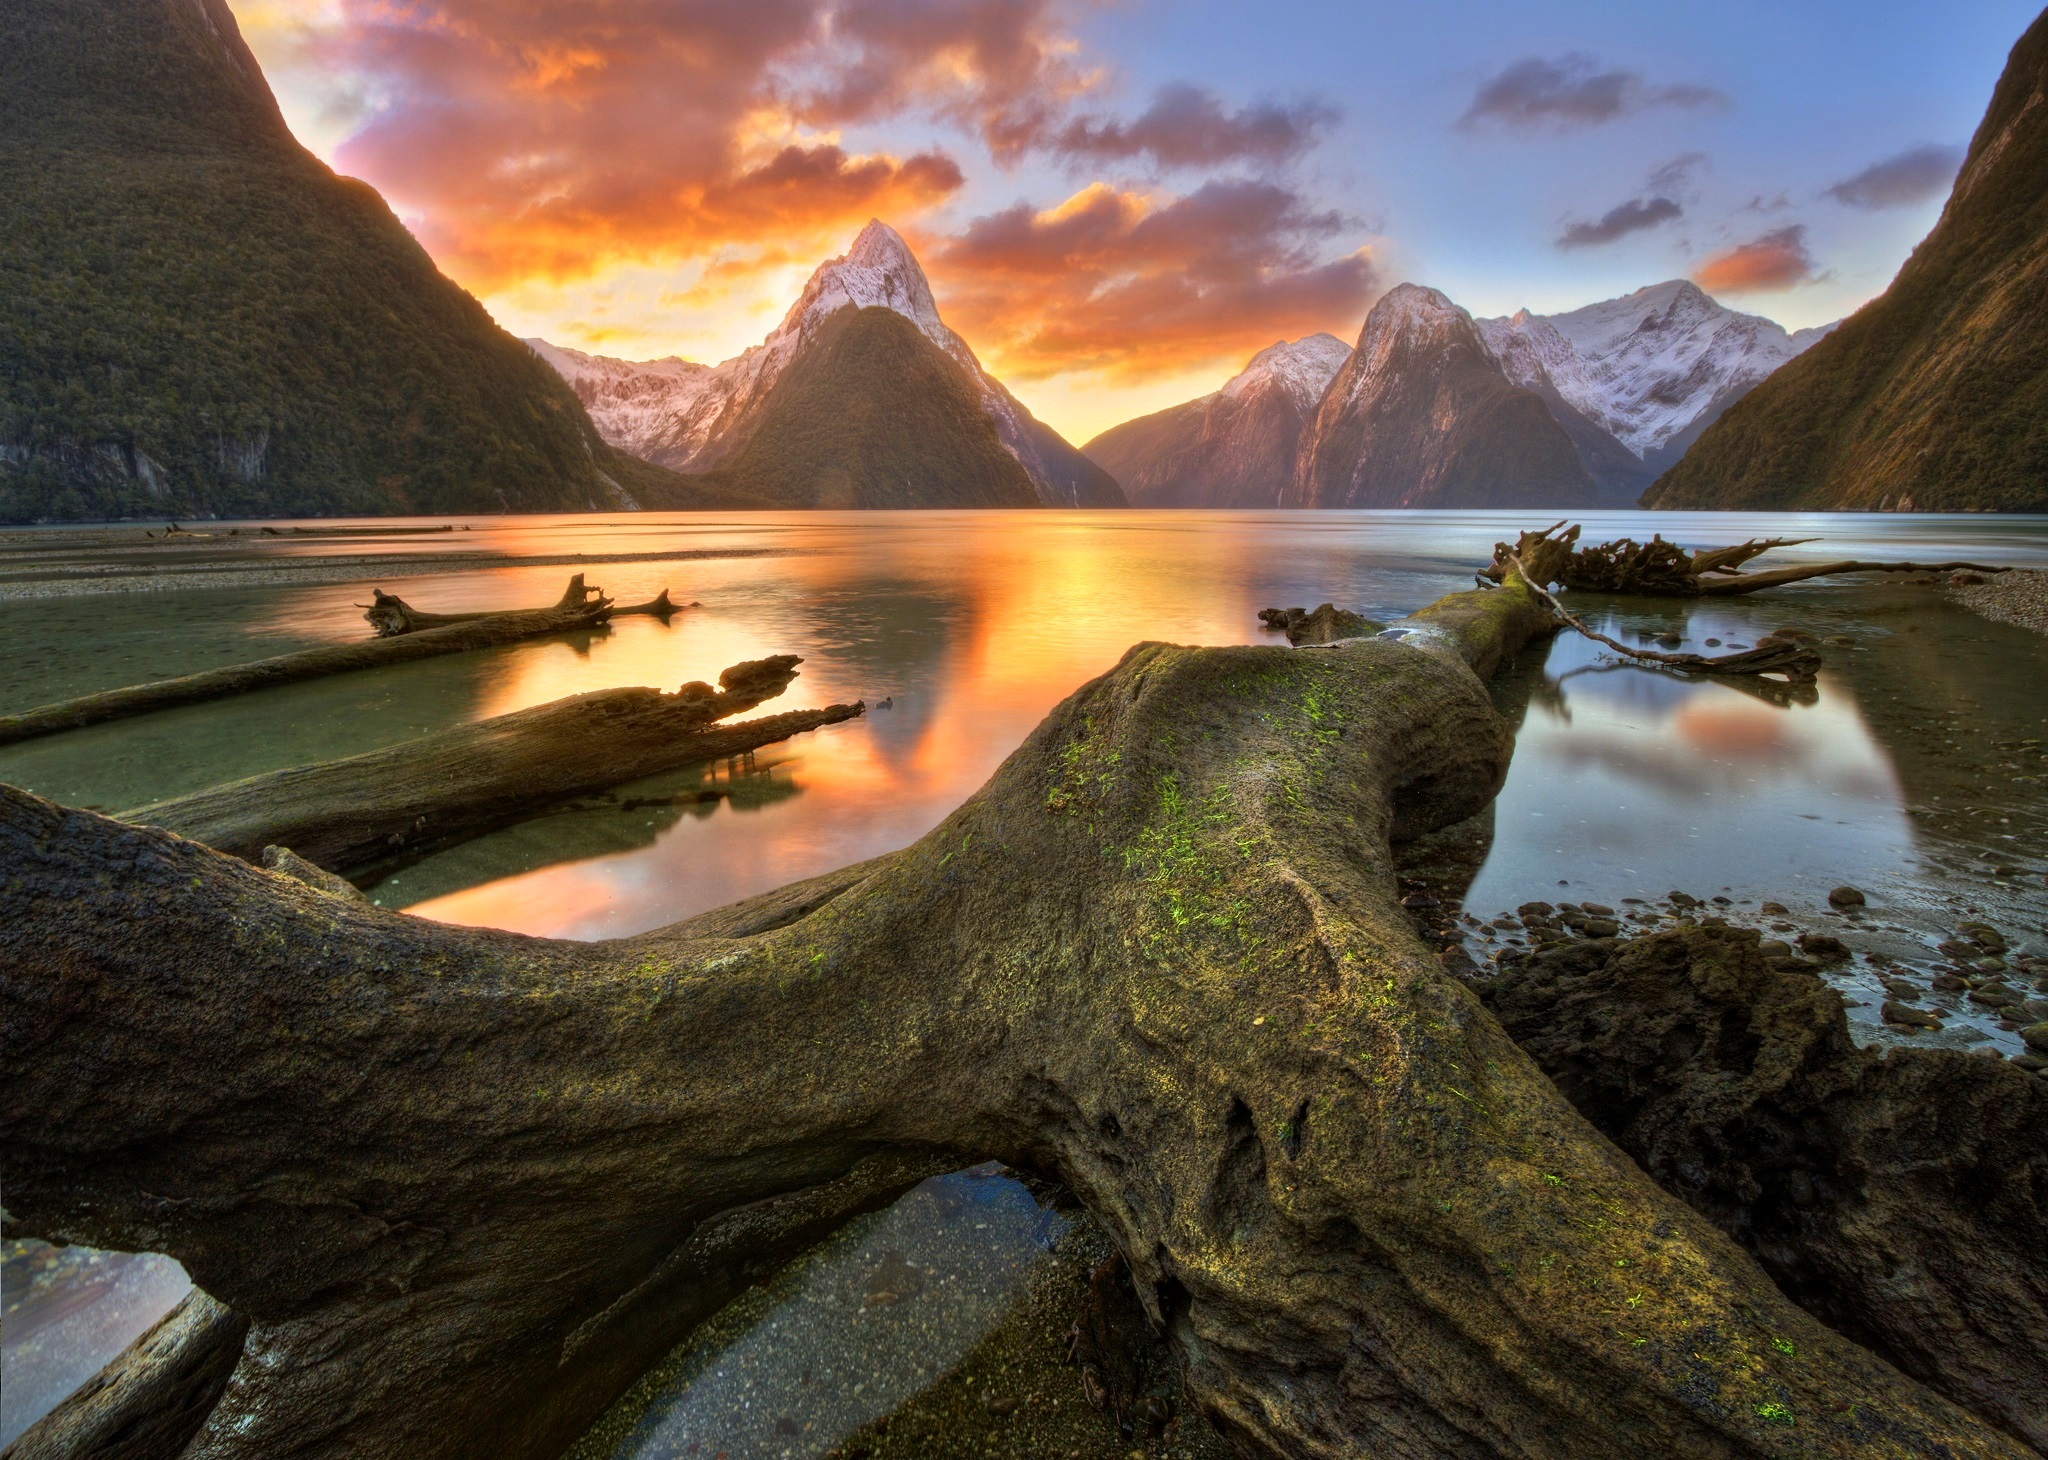 Clouds, New Zealand, sky, mountains, Milford Sound, lake, Trunks